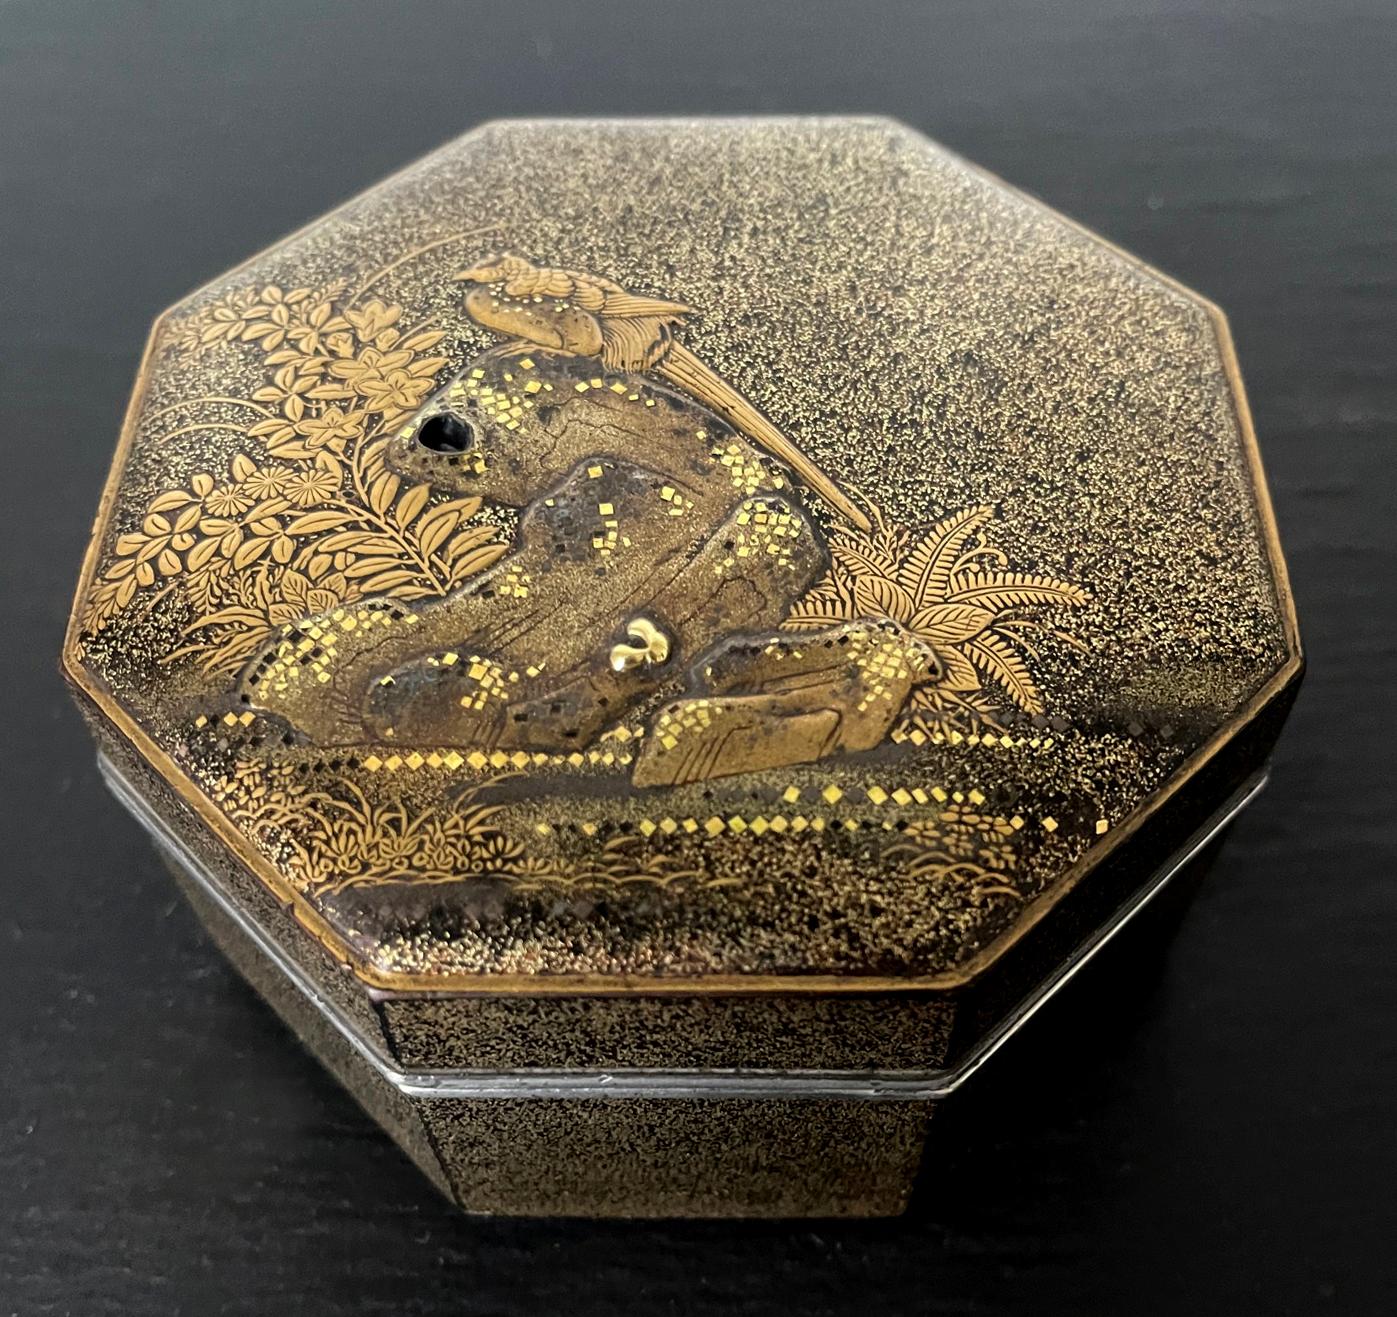 Silver Exquisite Early Japanese Lacquer Kobako Box with Insert Tray